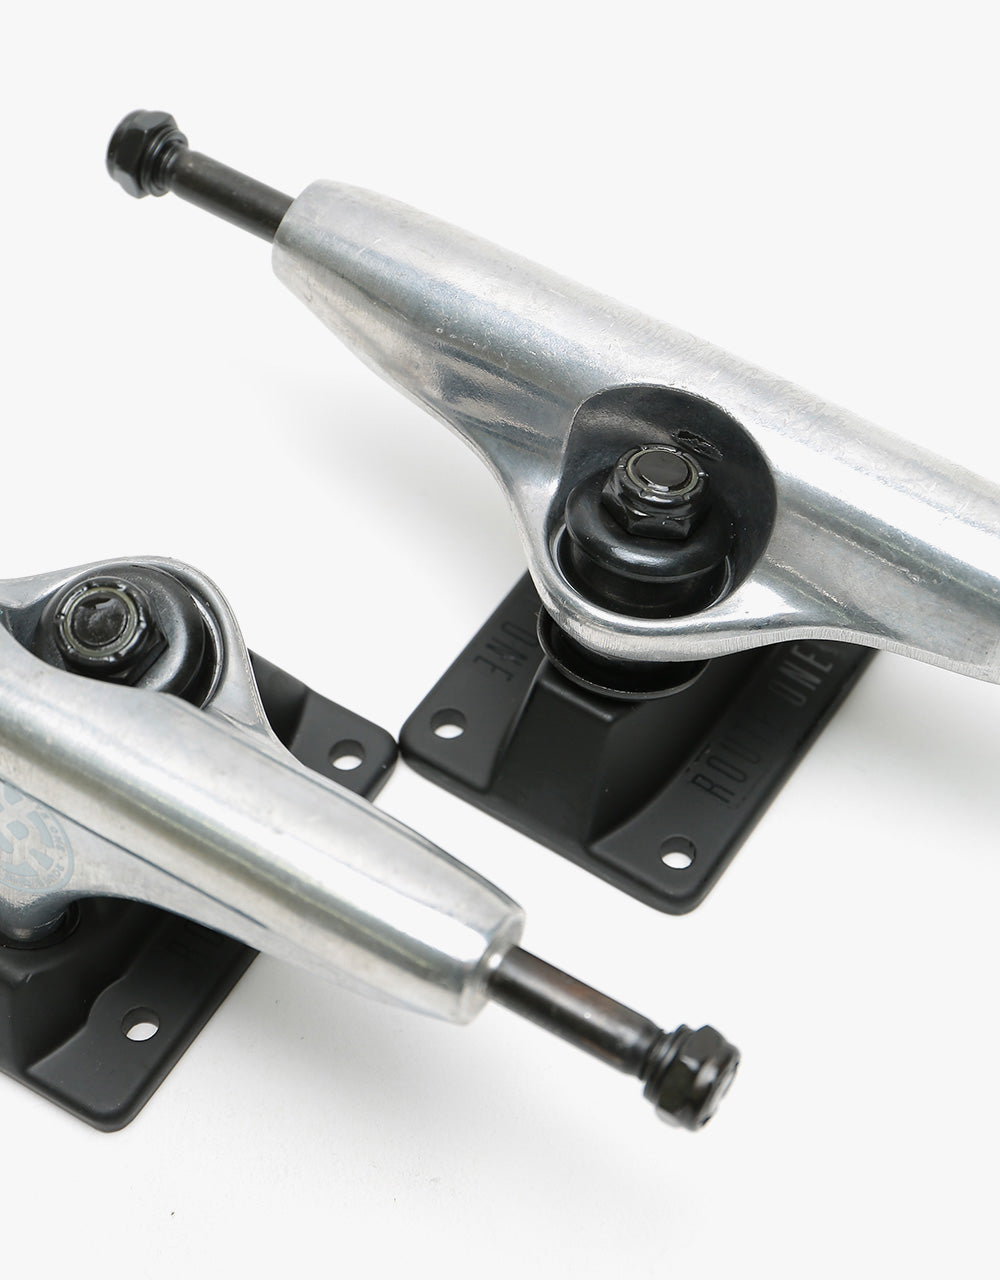 Route One Stamp Logo 5.0 Low Skateboard Trucks (Pair)